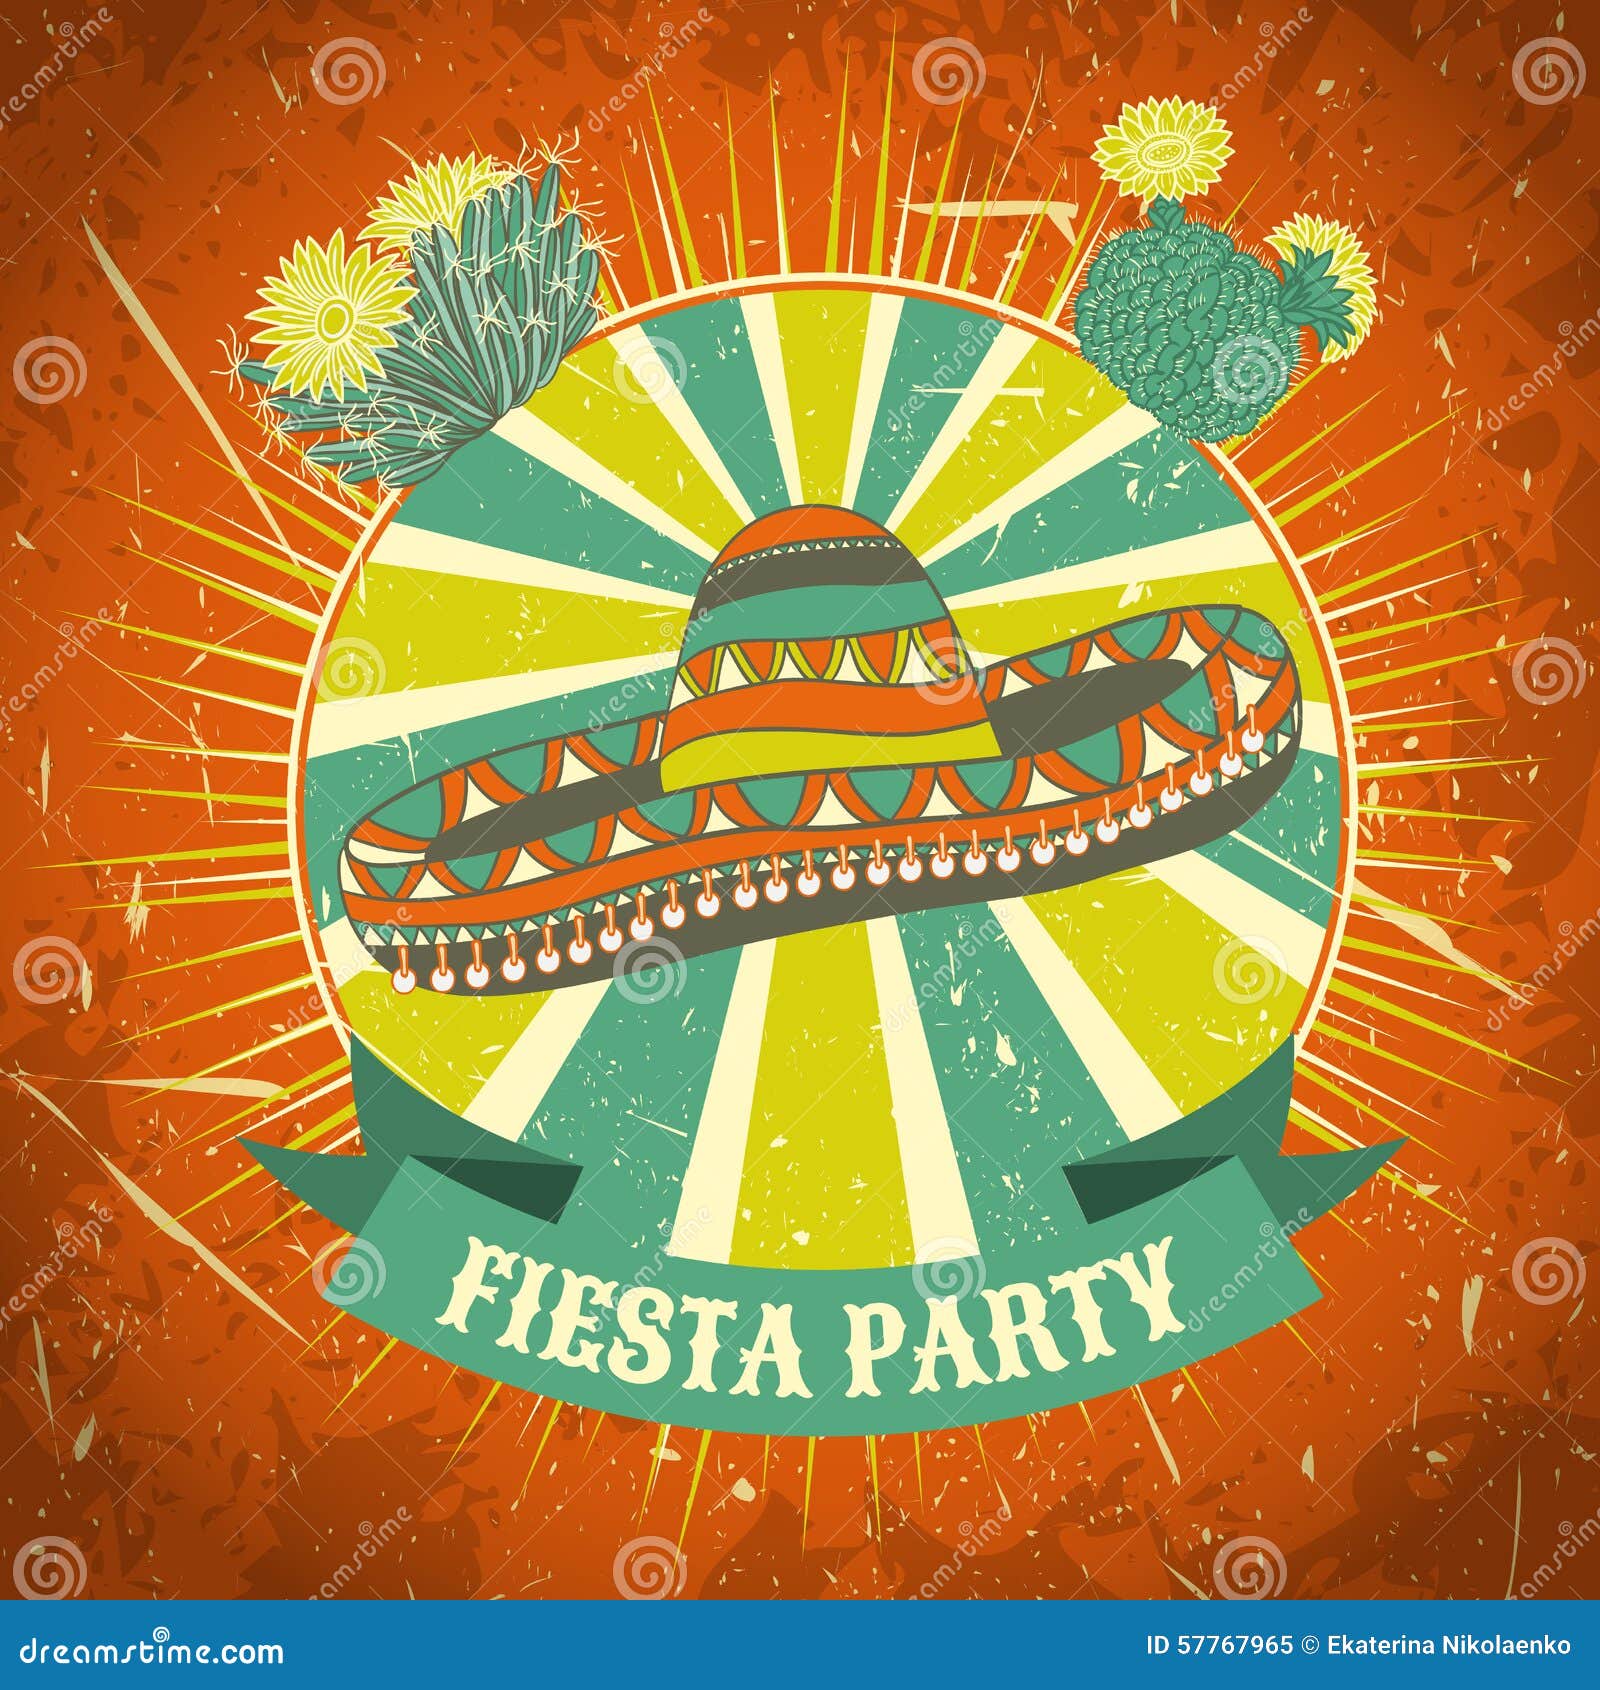 Collection of Mexican holidays symbols set. Fiesta party supplies. Vector., Stock vector